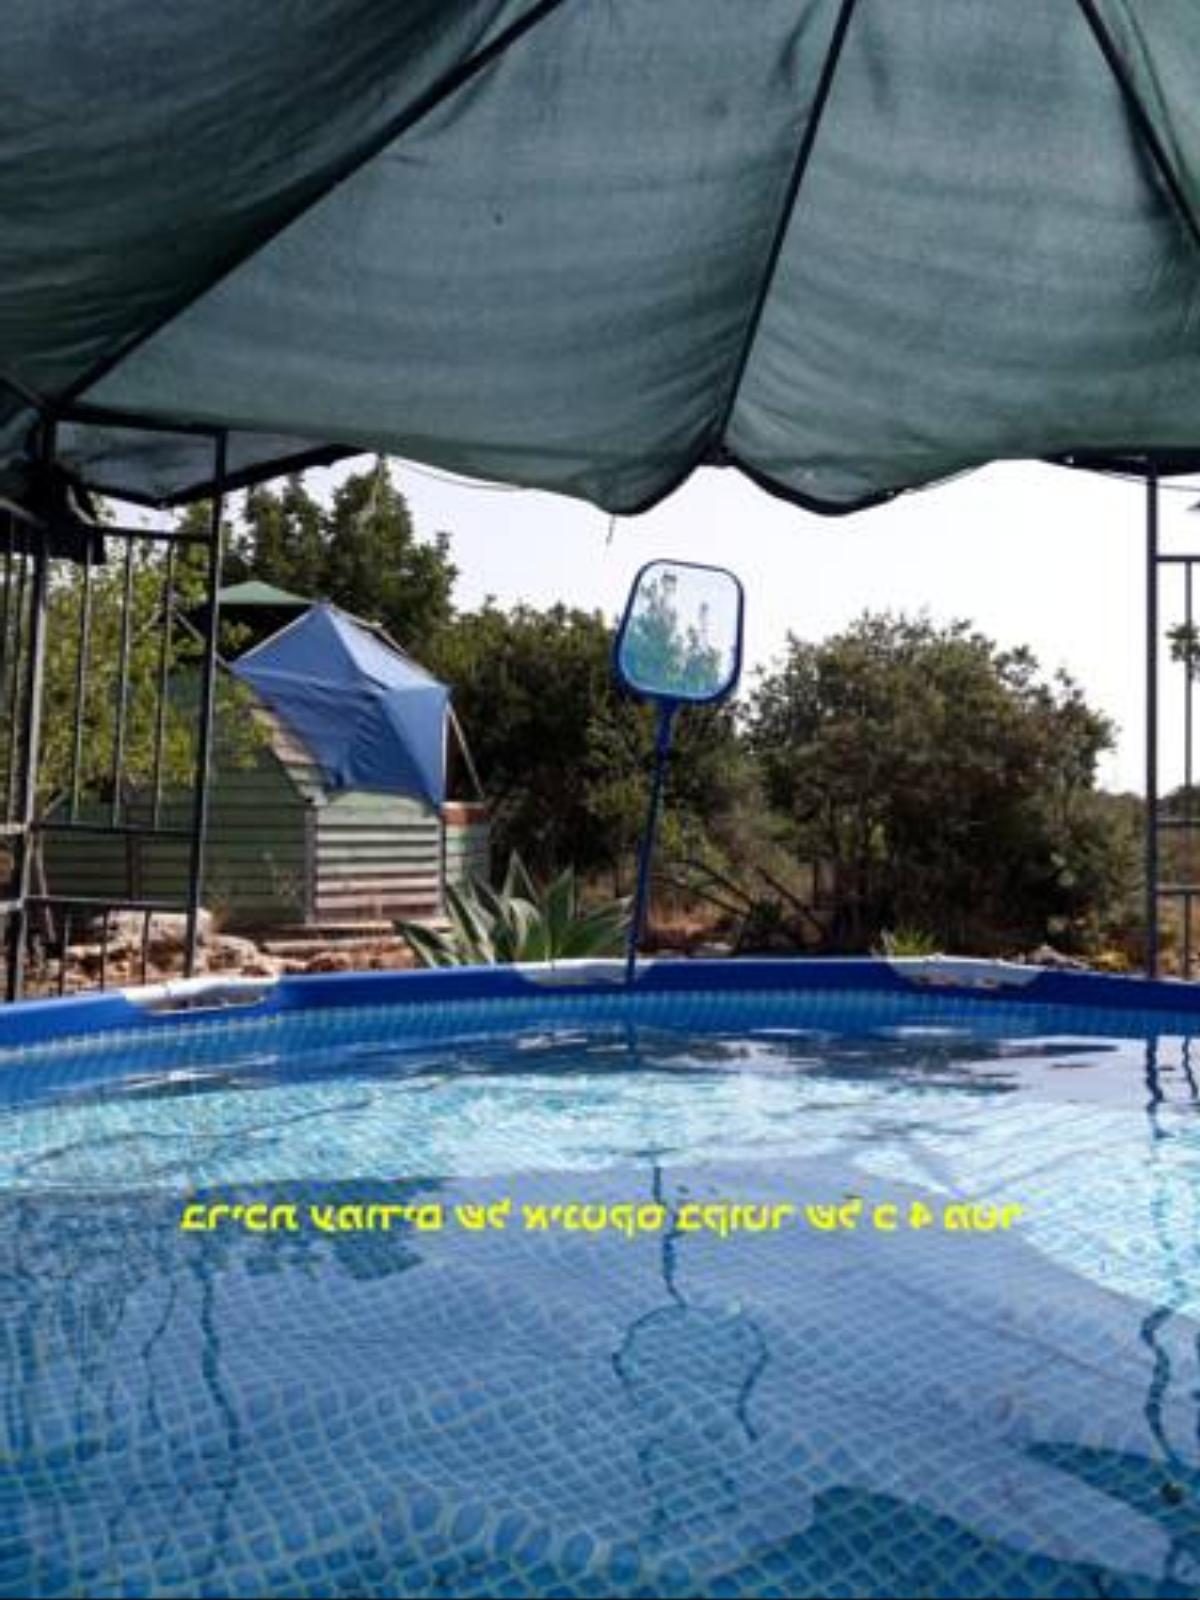 Country lodging in Manot Hotel Manot Israel